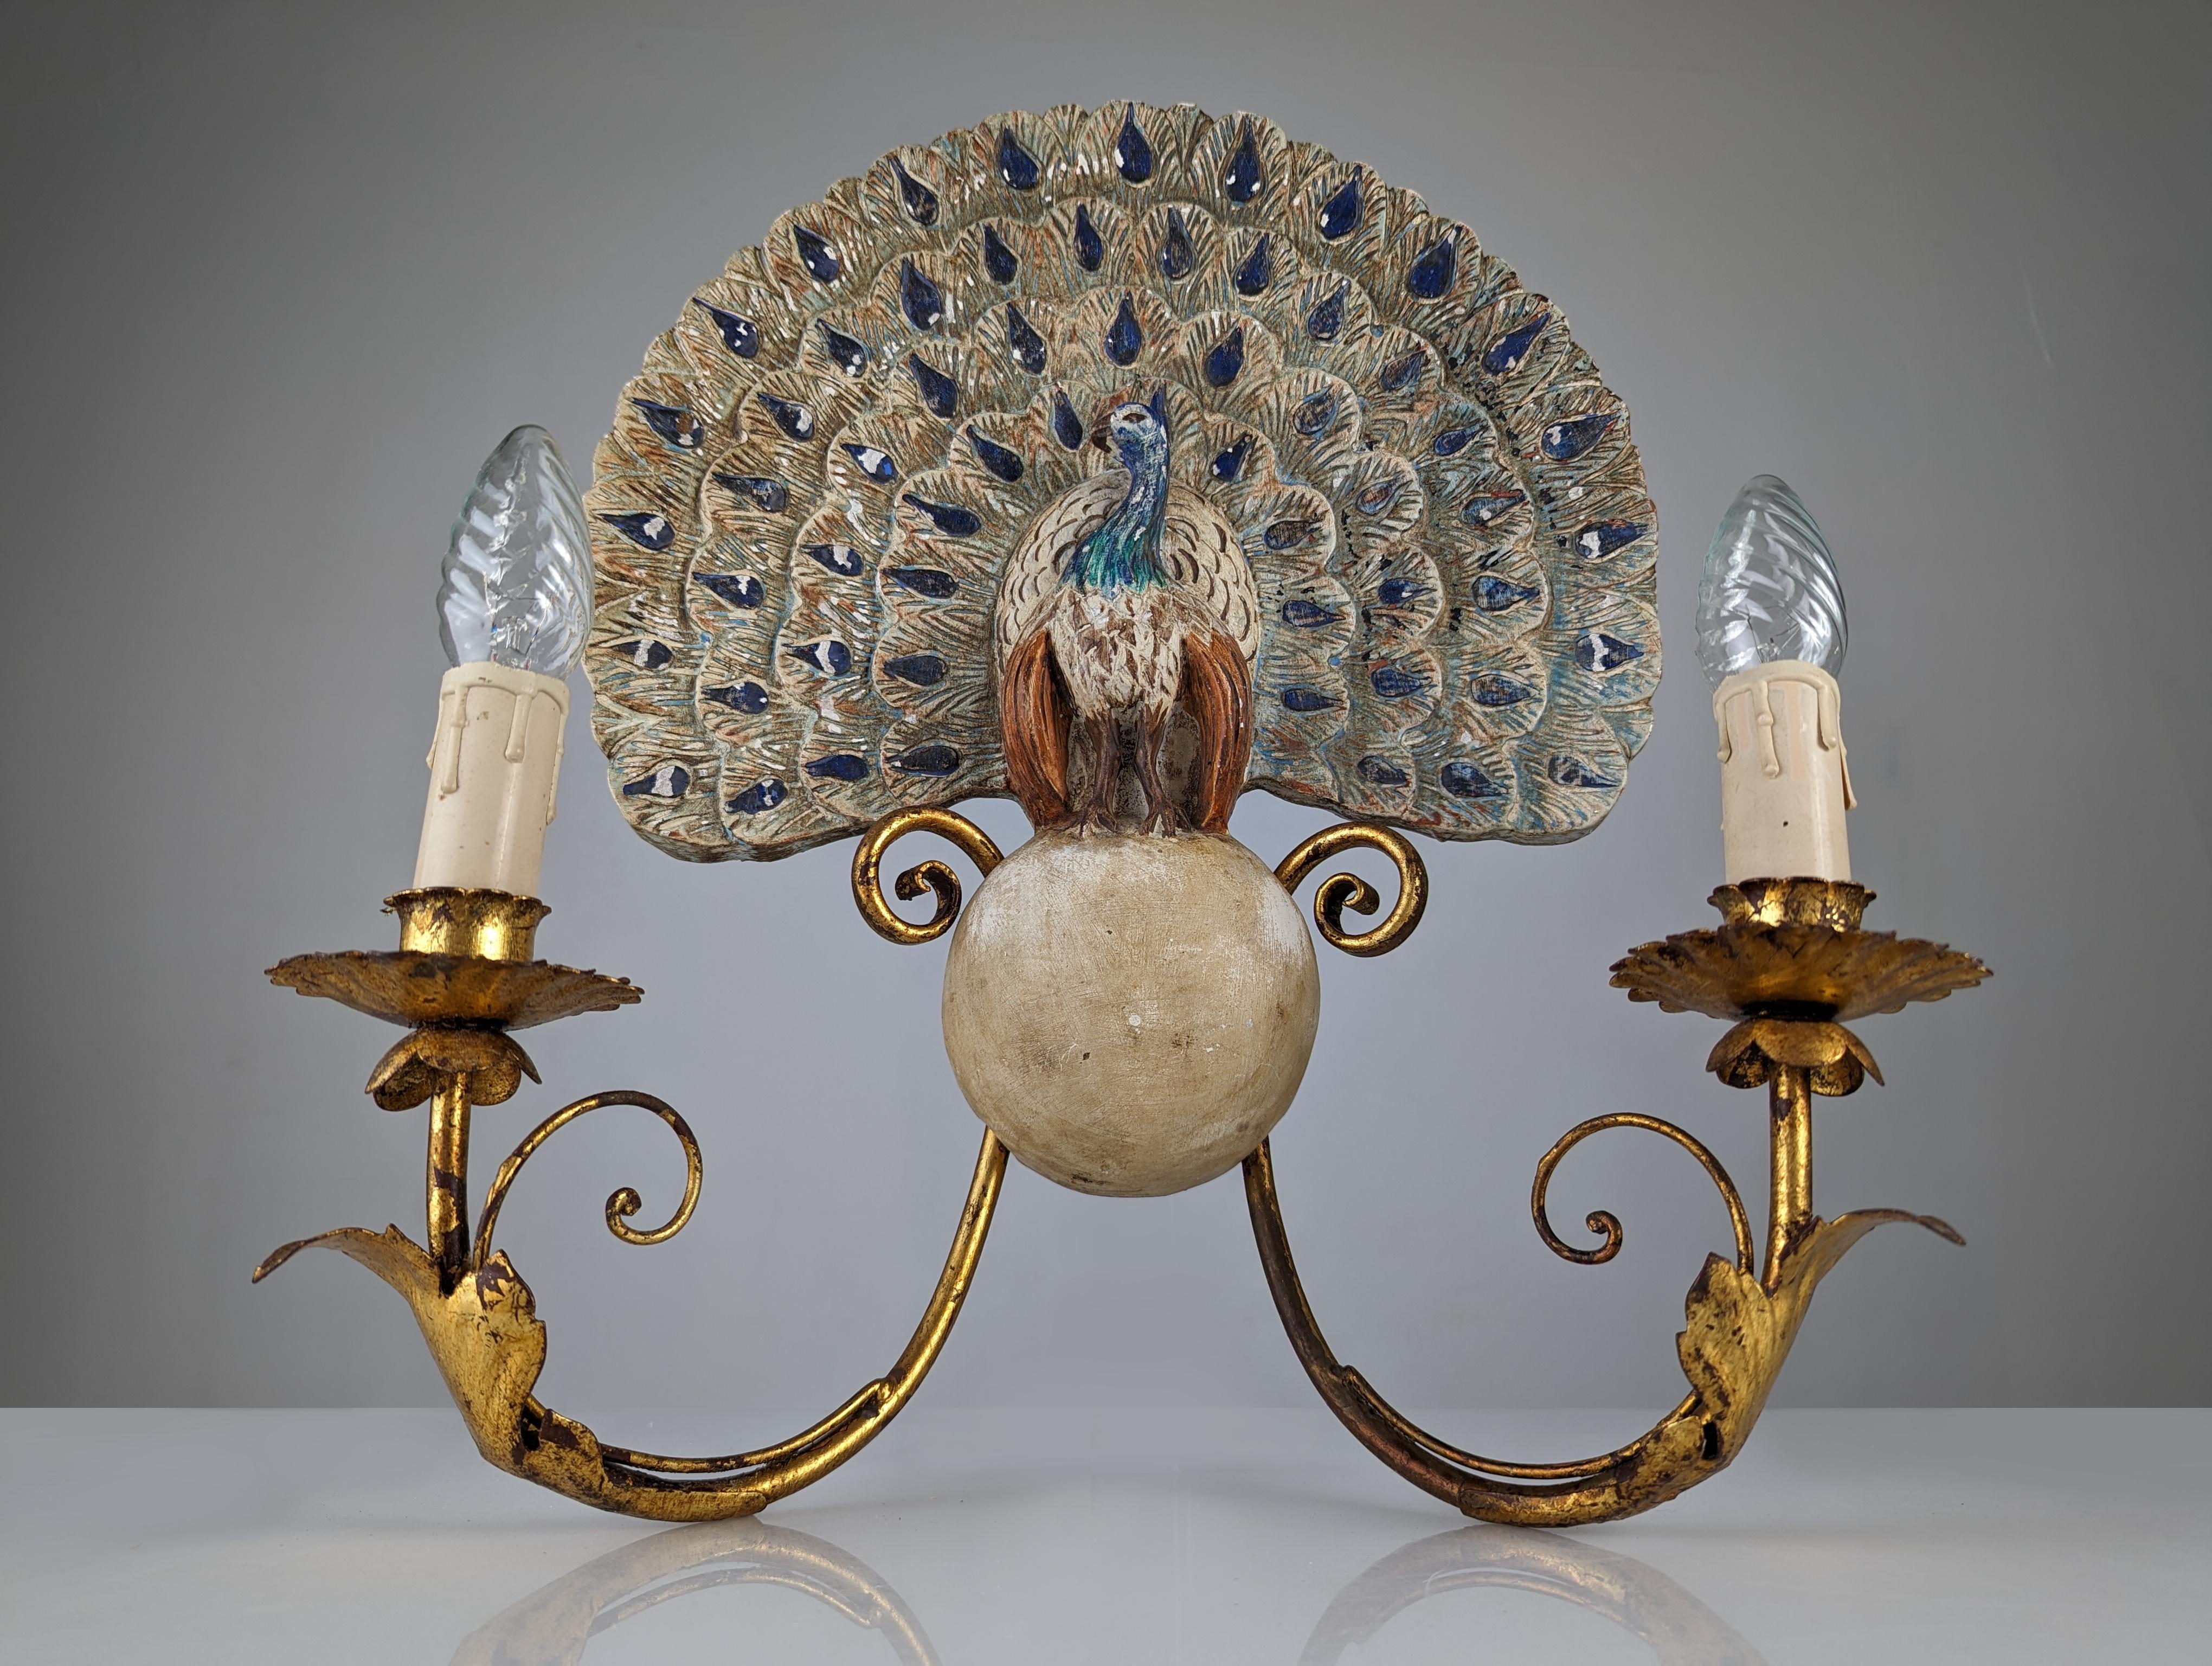 Special peacock applique with its beautiful extended tail carved in polychrome wood perched on a wooden sphere from which two arms hang, decorated with golden foliage. A fantastic work from the Early 20th Century.